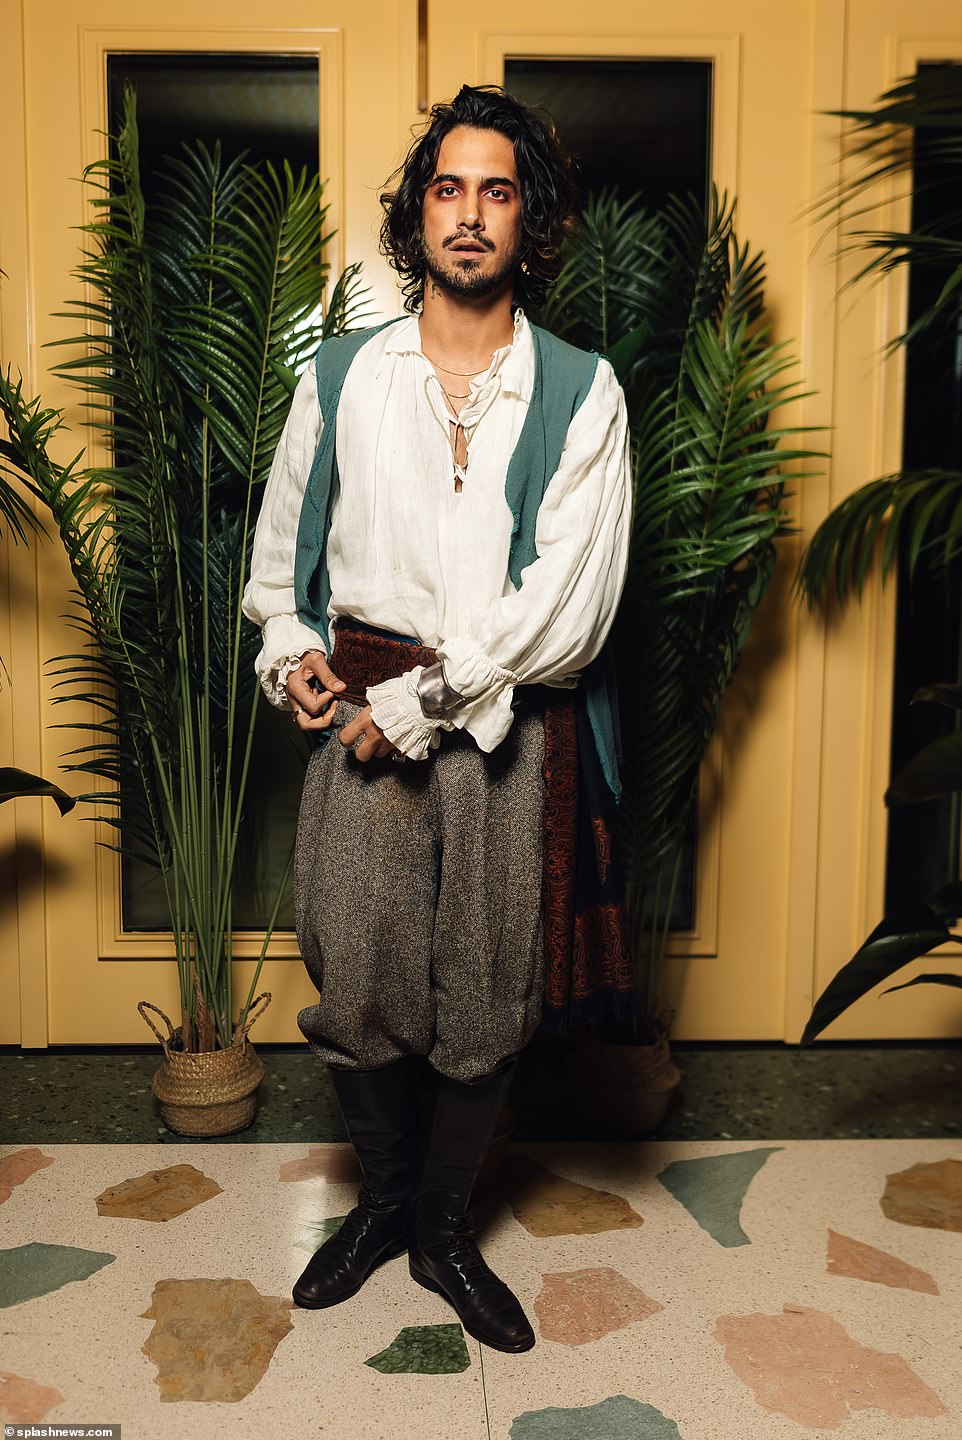 Matching costume: For the lavish affair thrown by Vas J. Morgan and Michael Braun with Booby Tape, her new boyfriend Avan Jogia, 31, complemented her look in a pirate costume